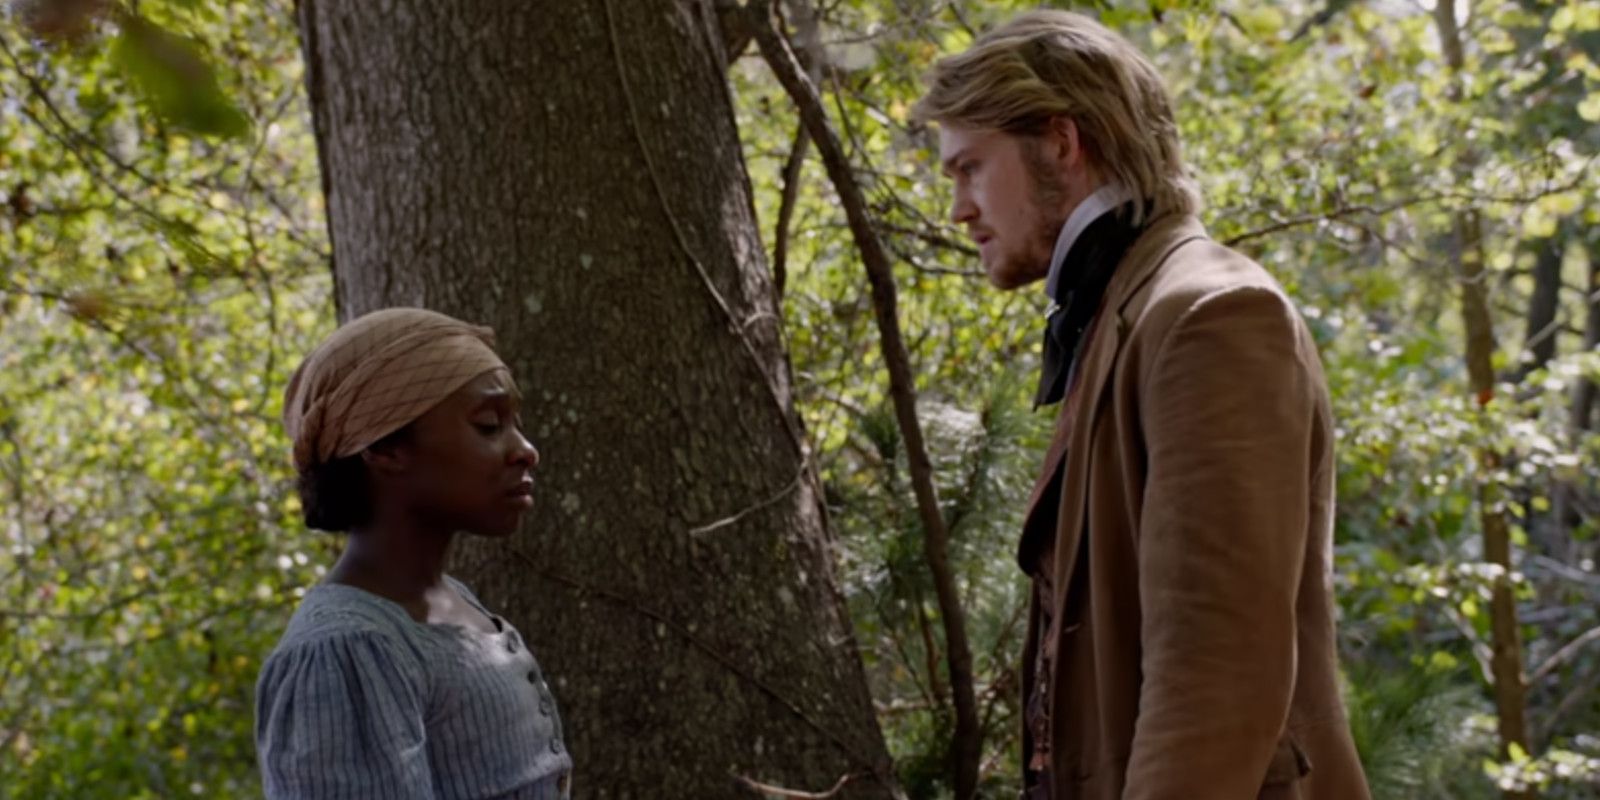 The True Story Behind the Harriet Tubman Movie